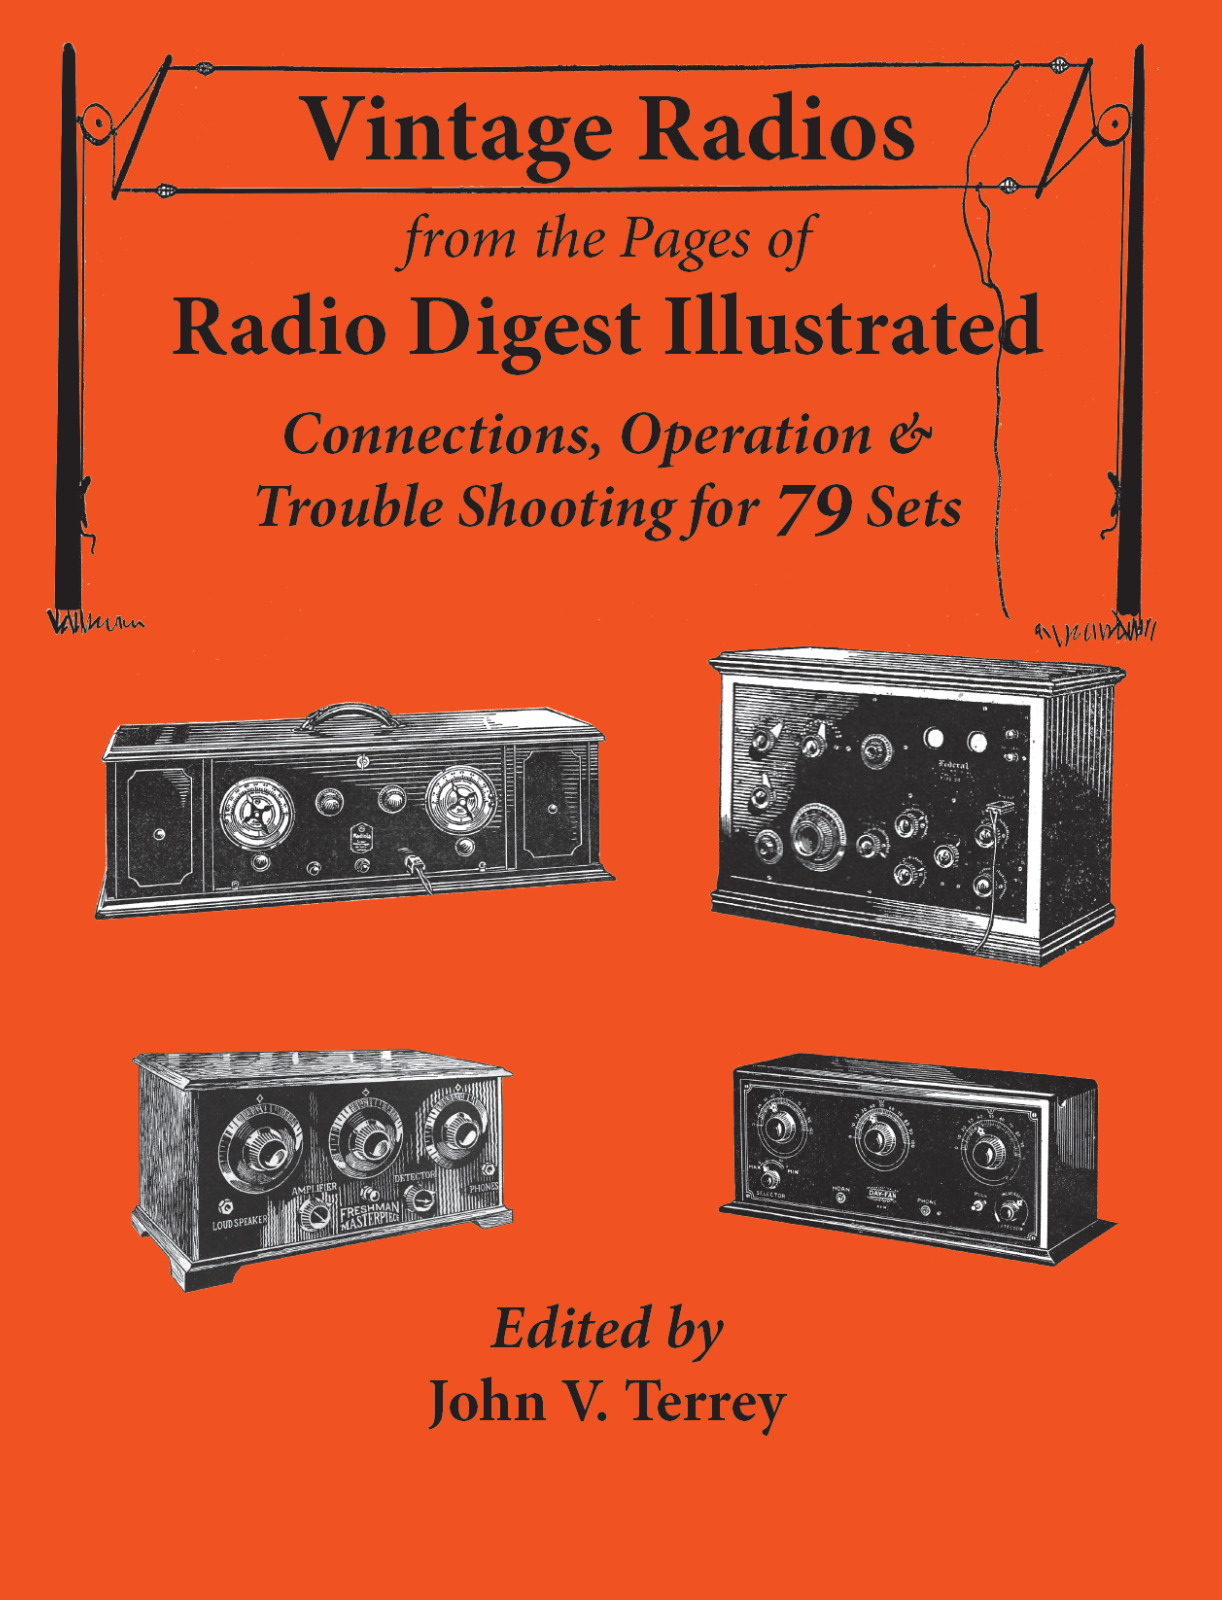 Vintage Radios from the Pages of Radio Digest Illustrated, NEW, from John Terrey